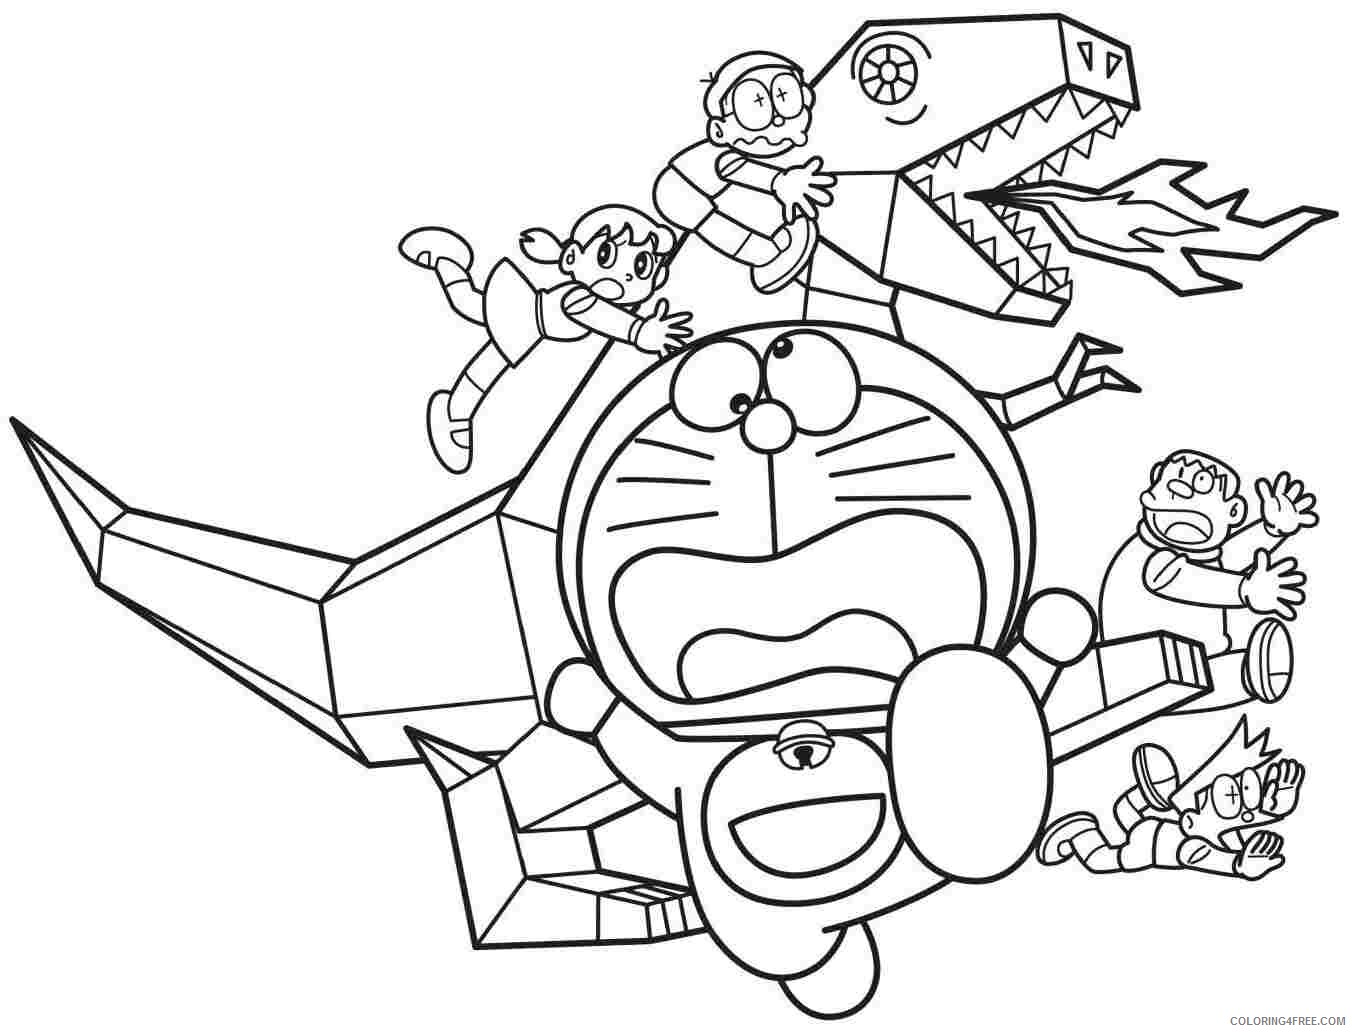 Doraemon Printable Coloring Pages Anime 1540782387_cartoon doraemon and friends amp 2021 0428 Coloring4free